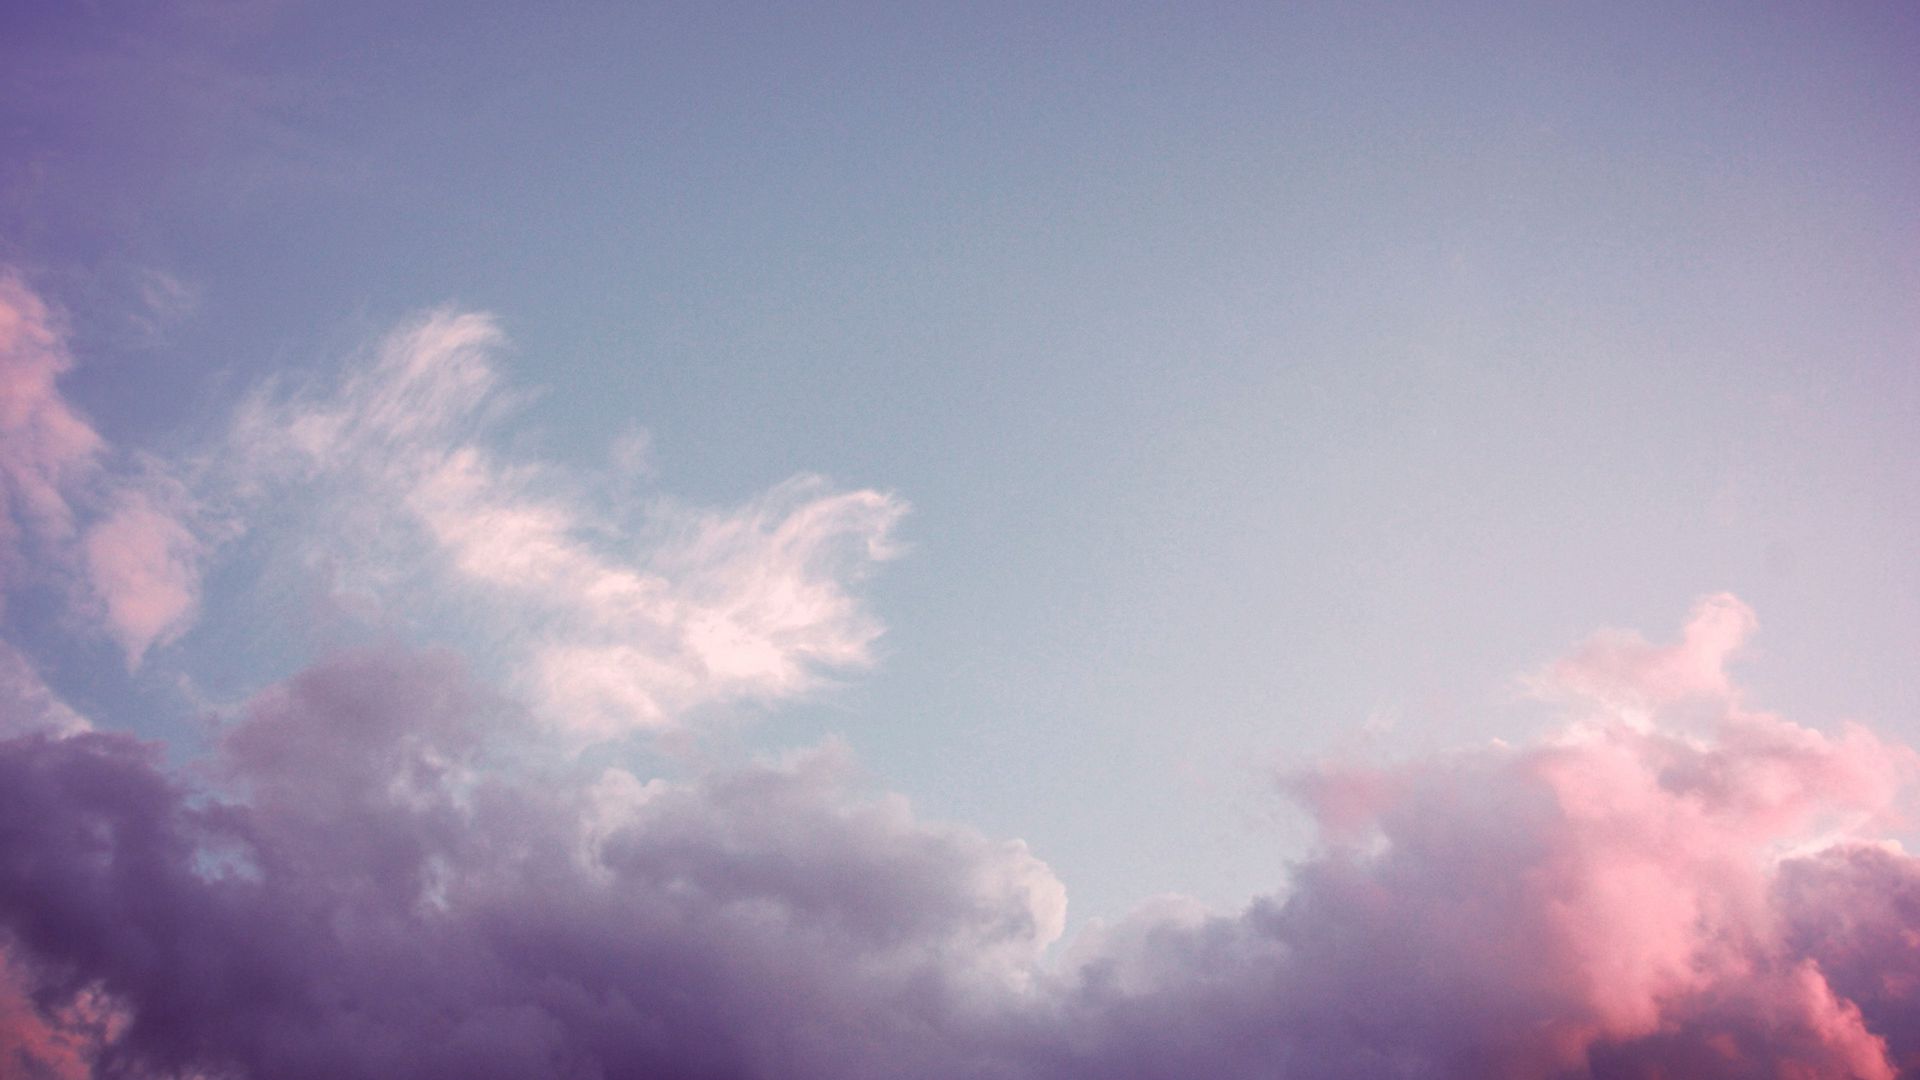 Download wallpaper 1920x1080 sky, clouds, pink full hd, hdtv, fhd, 1080p HD background